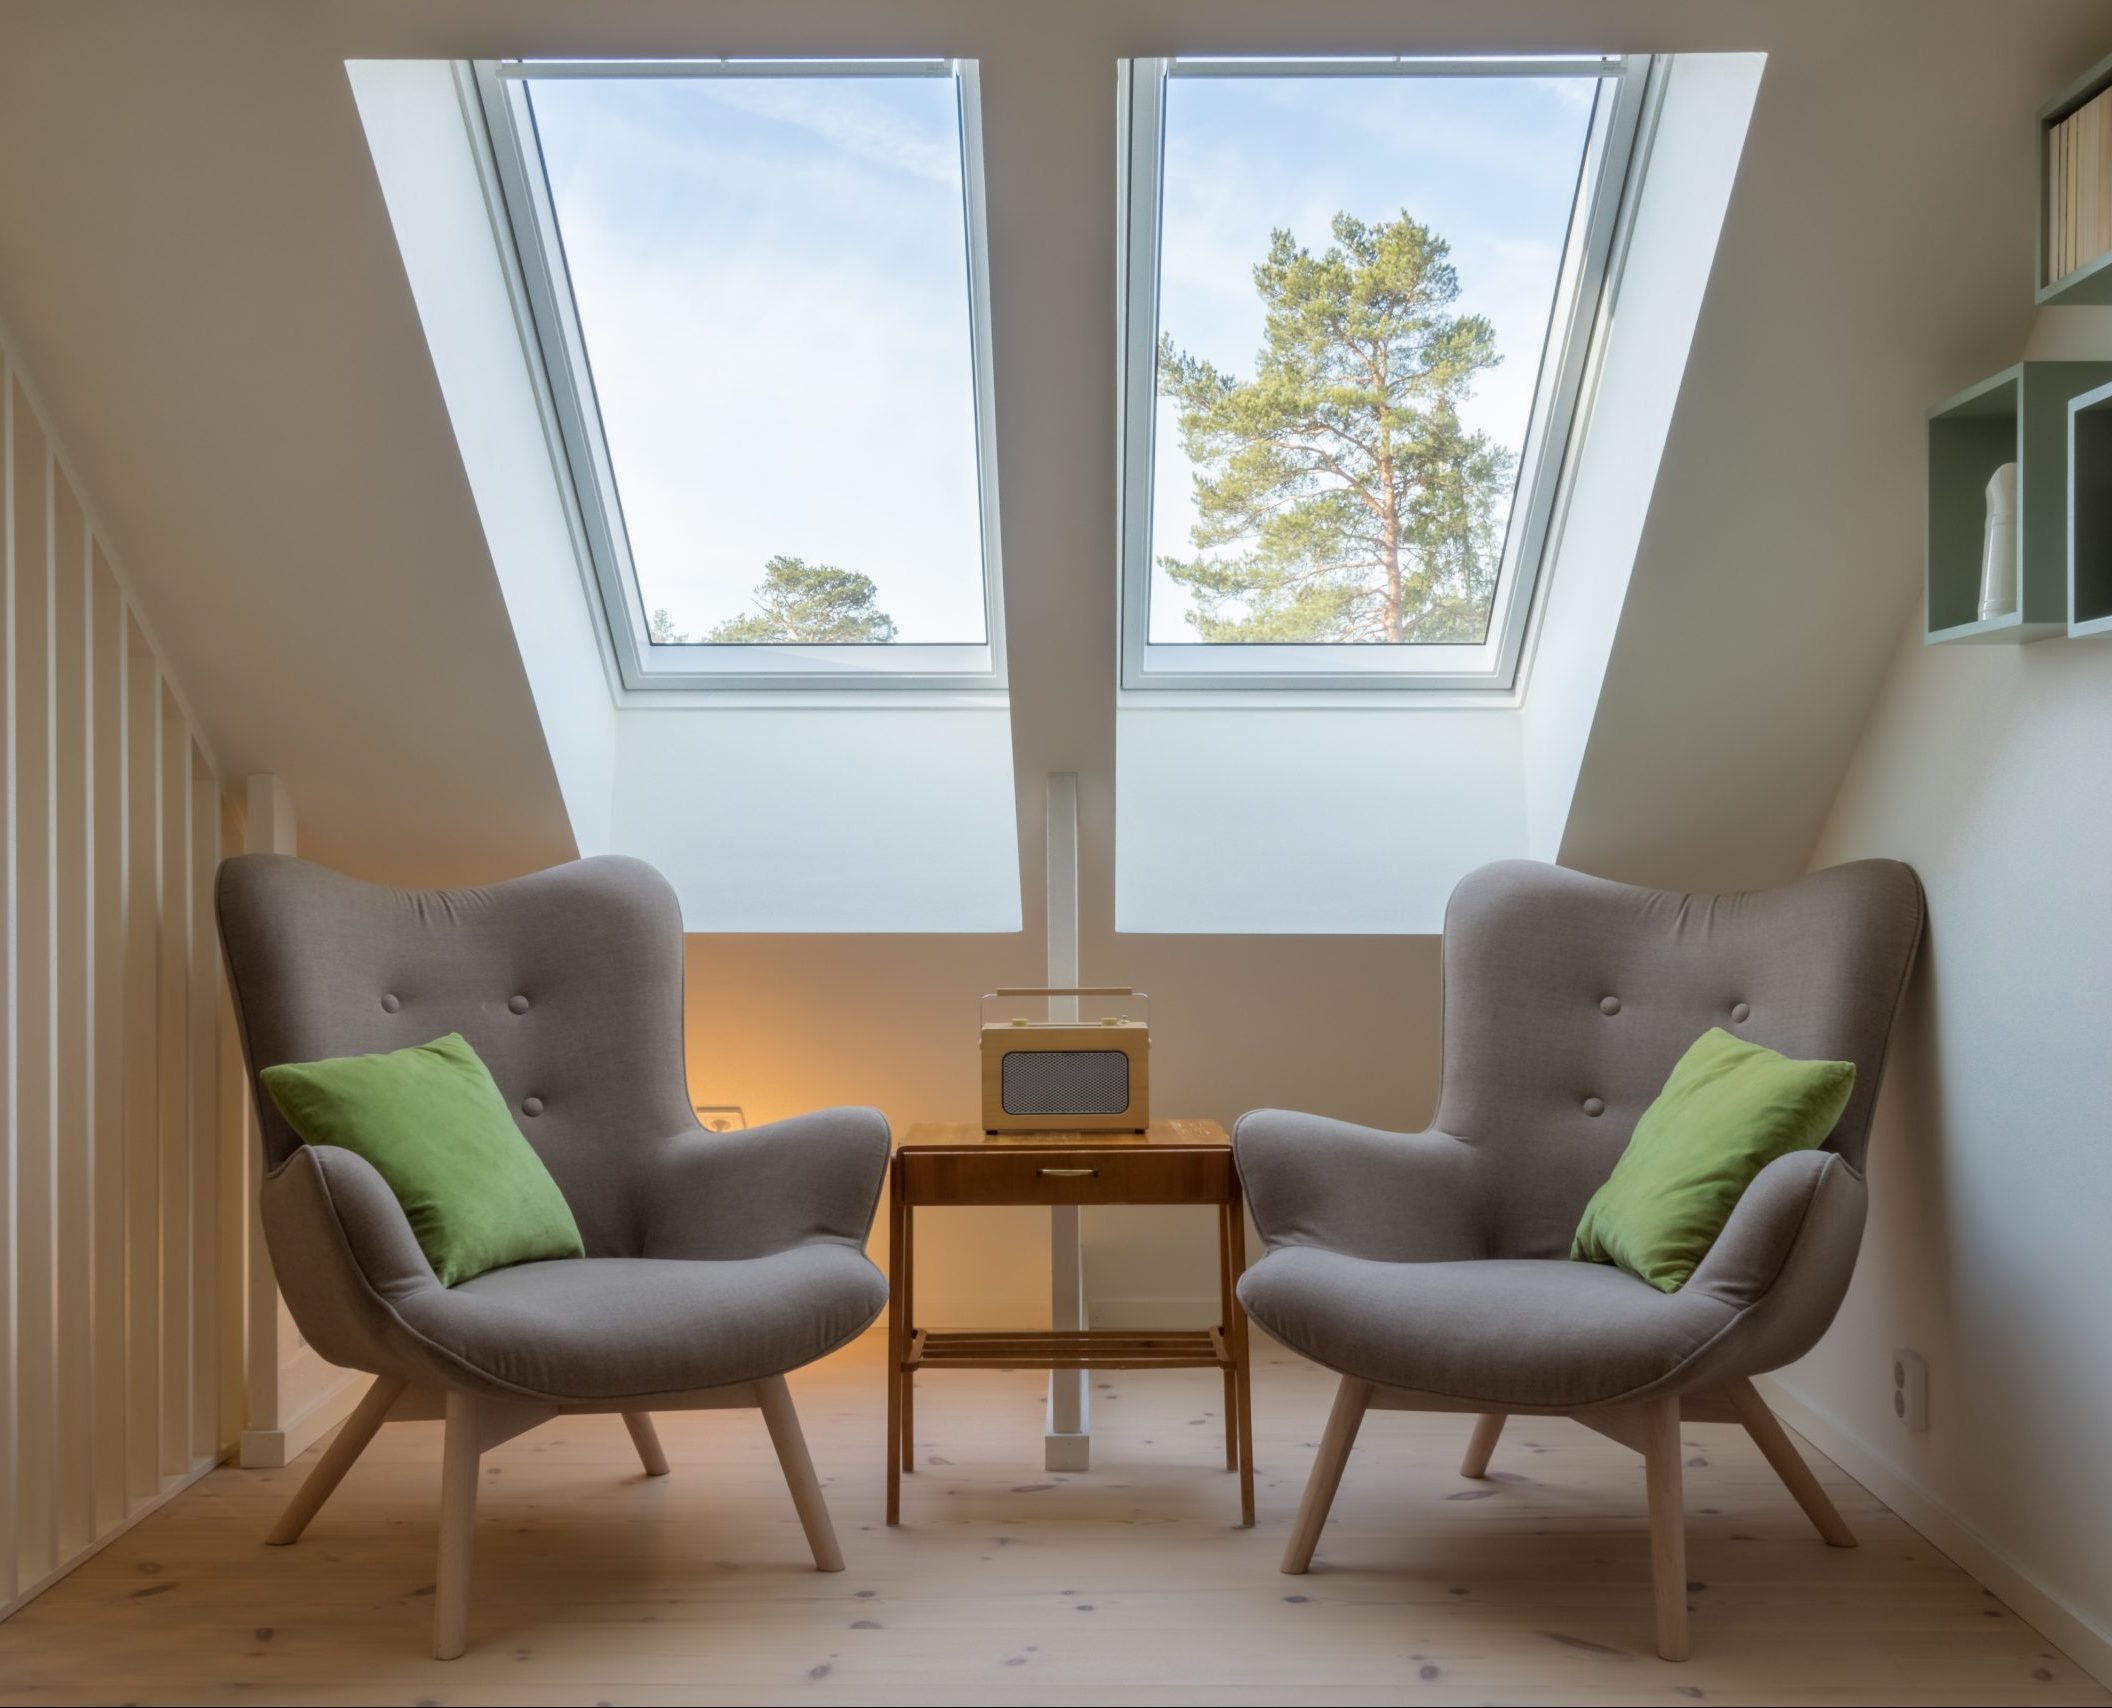 Solatube skylight in a common area of a house with chairs.